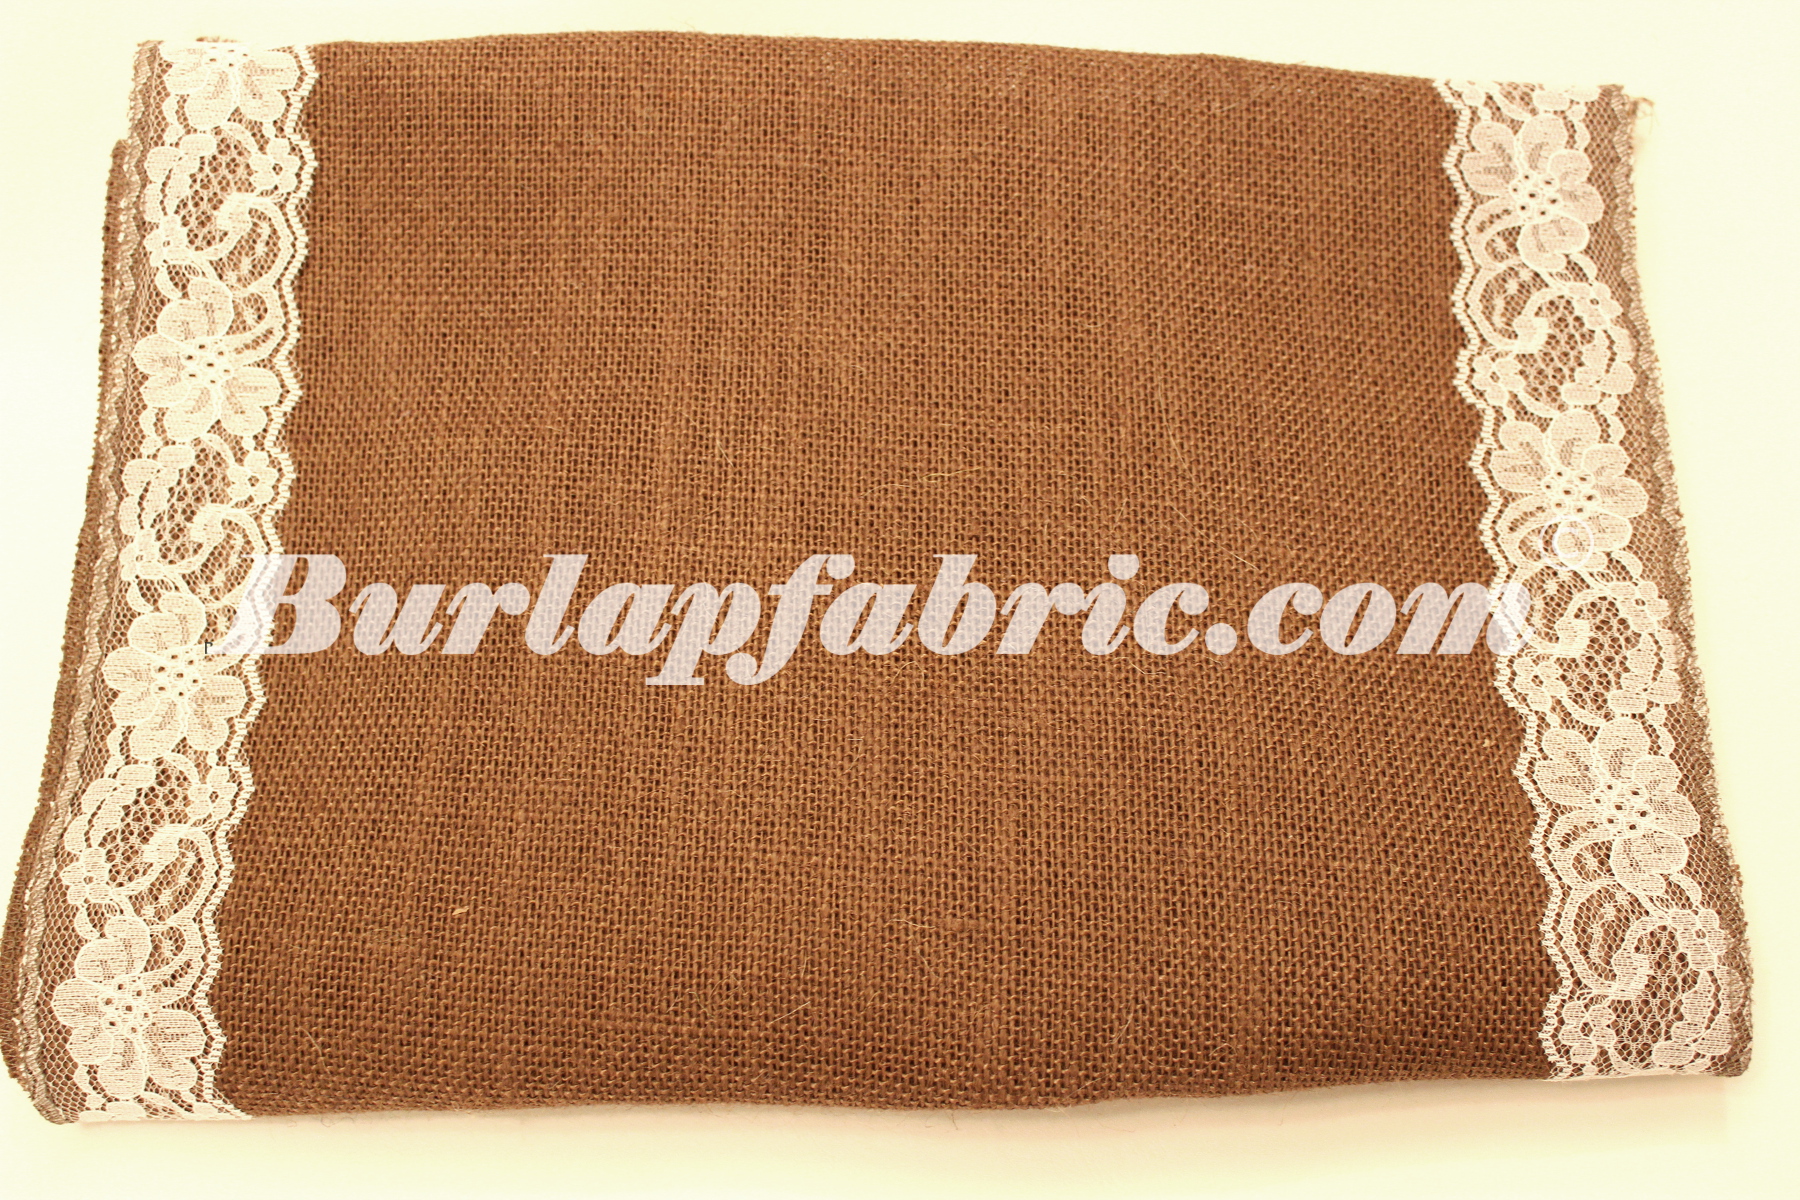 14" Brown Burlap Runner with 2" White Lace Borders